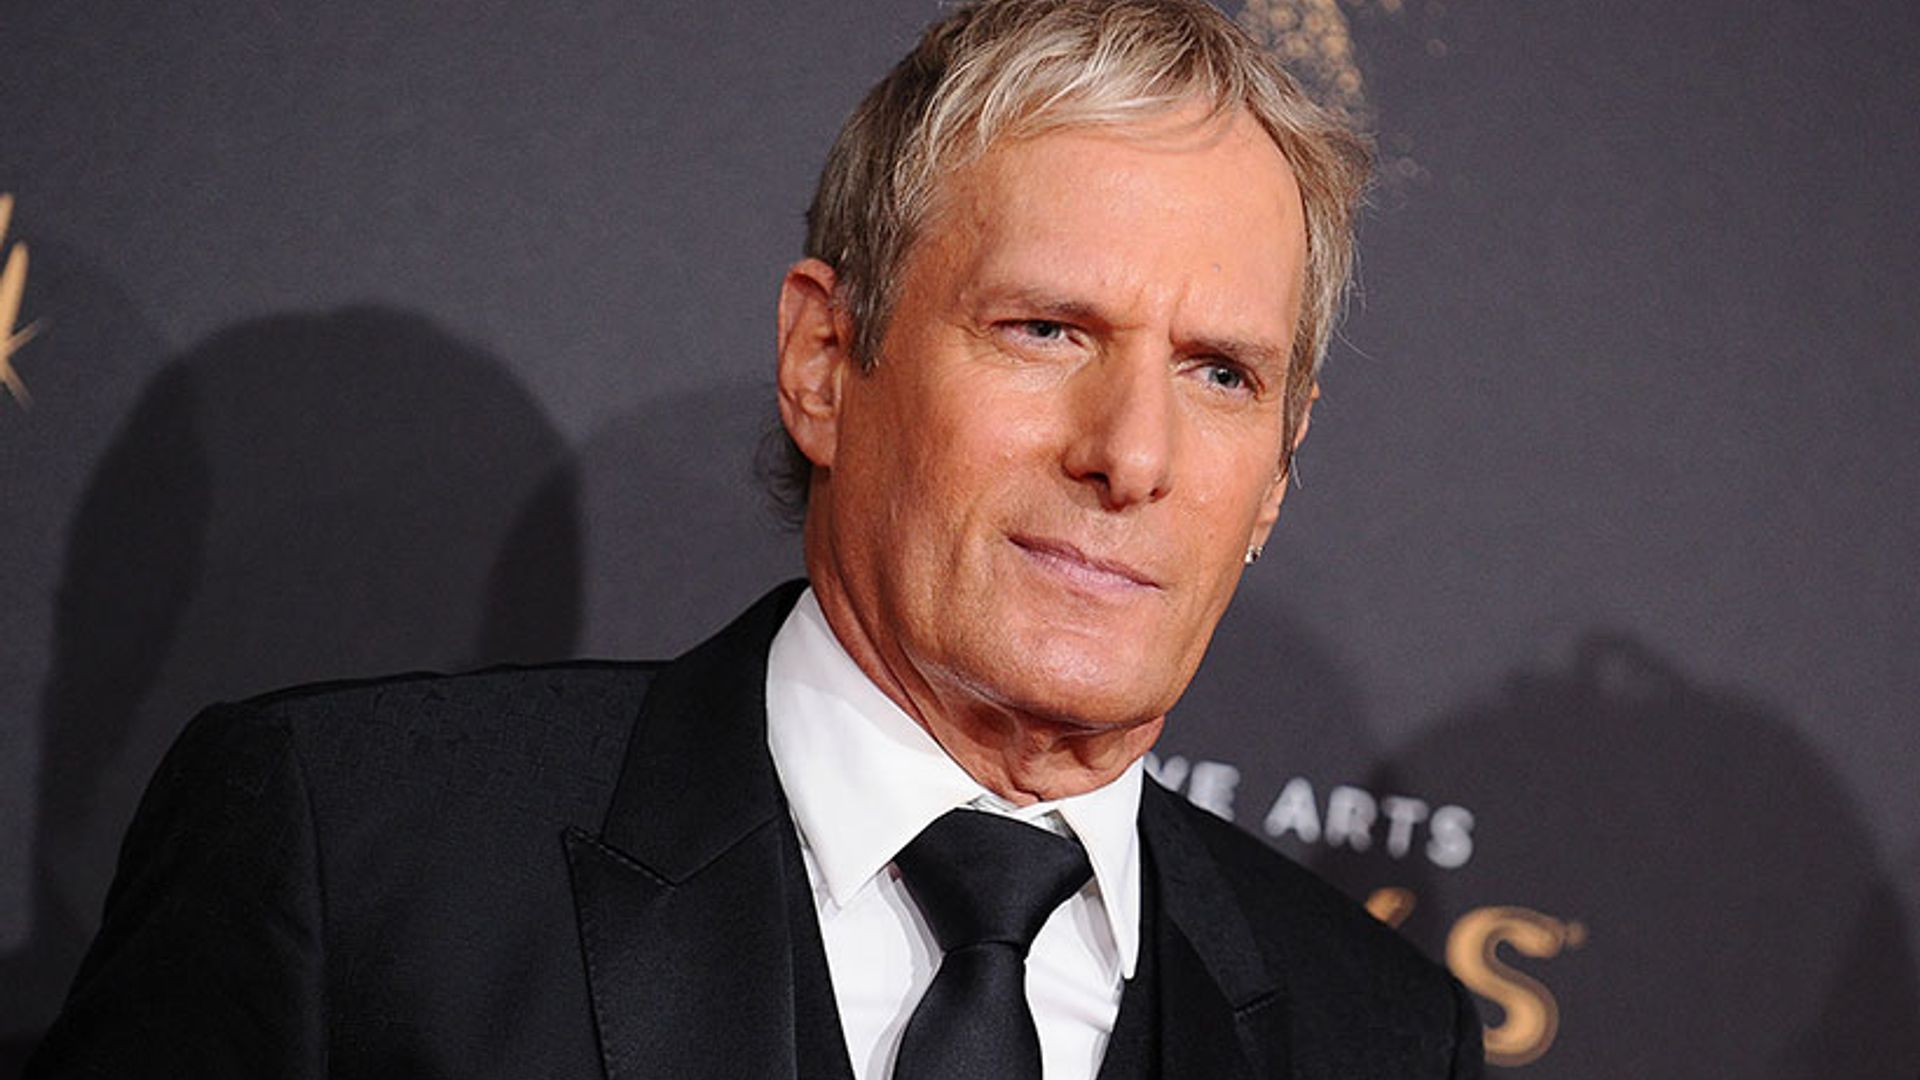 Exclusive: Michael Bolton opens up about the challenges he faced as an aspiring singer